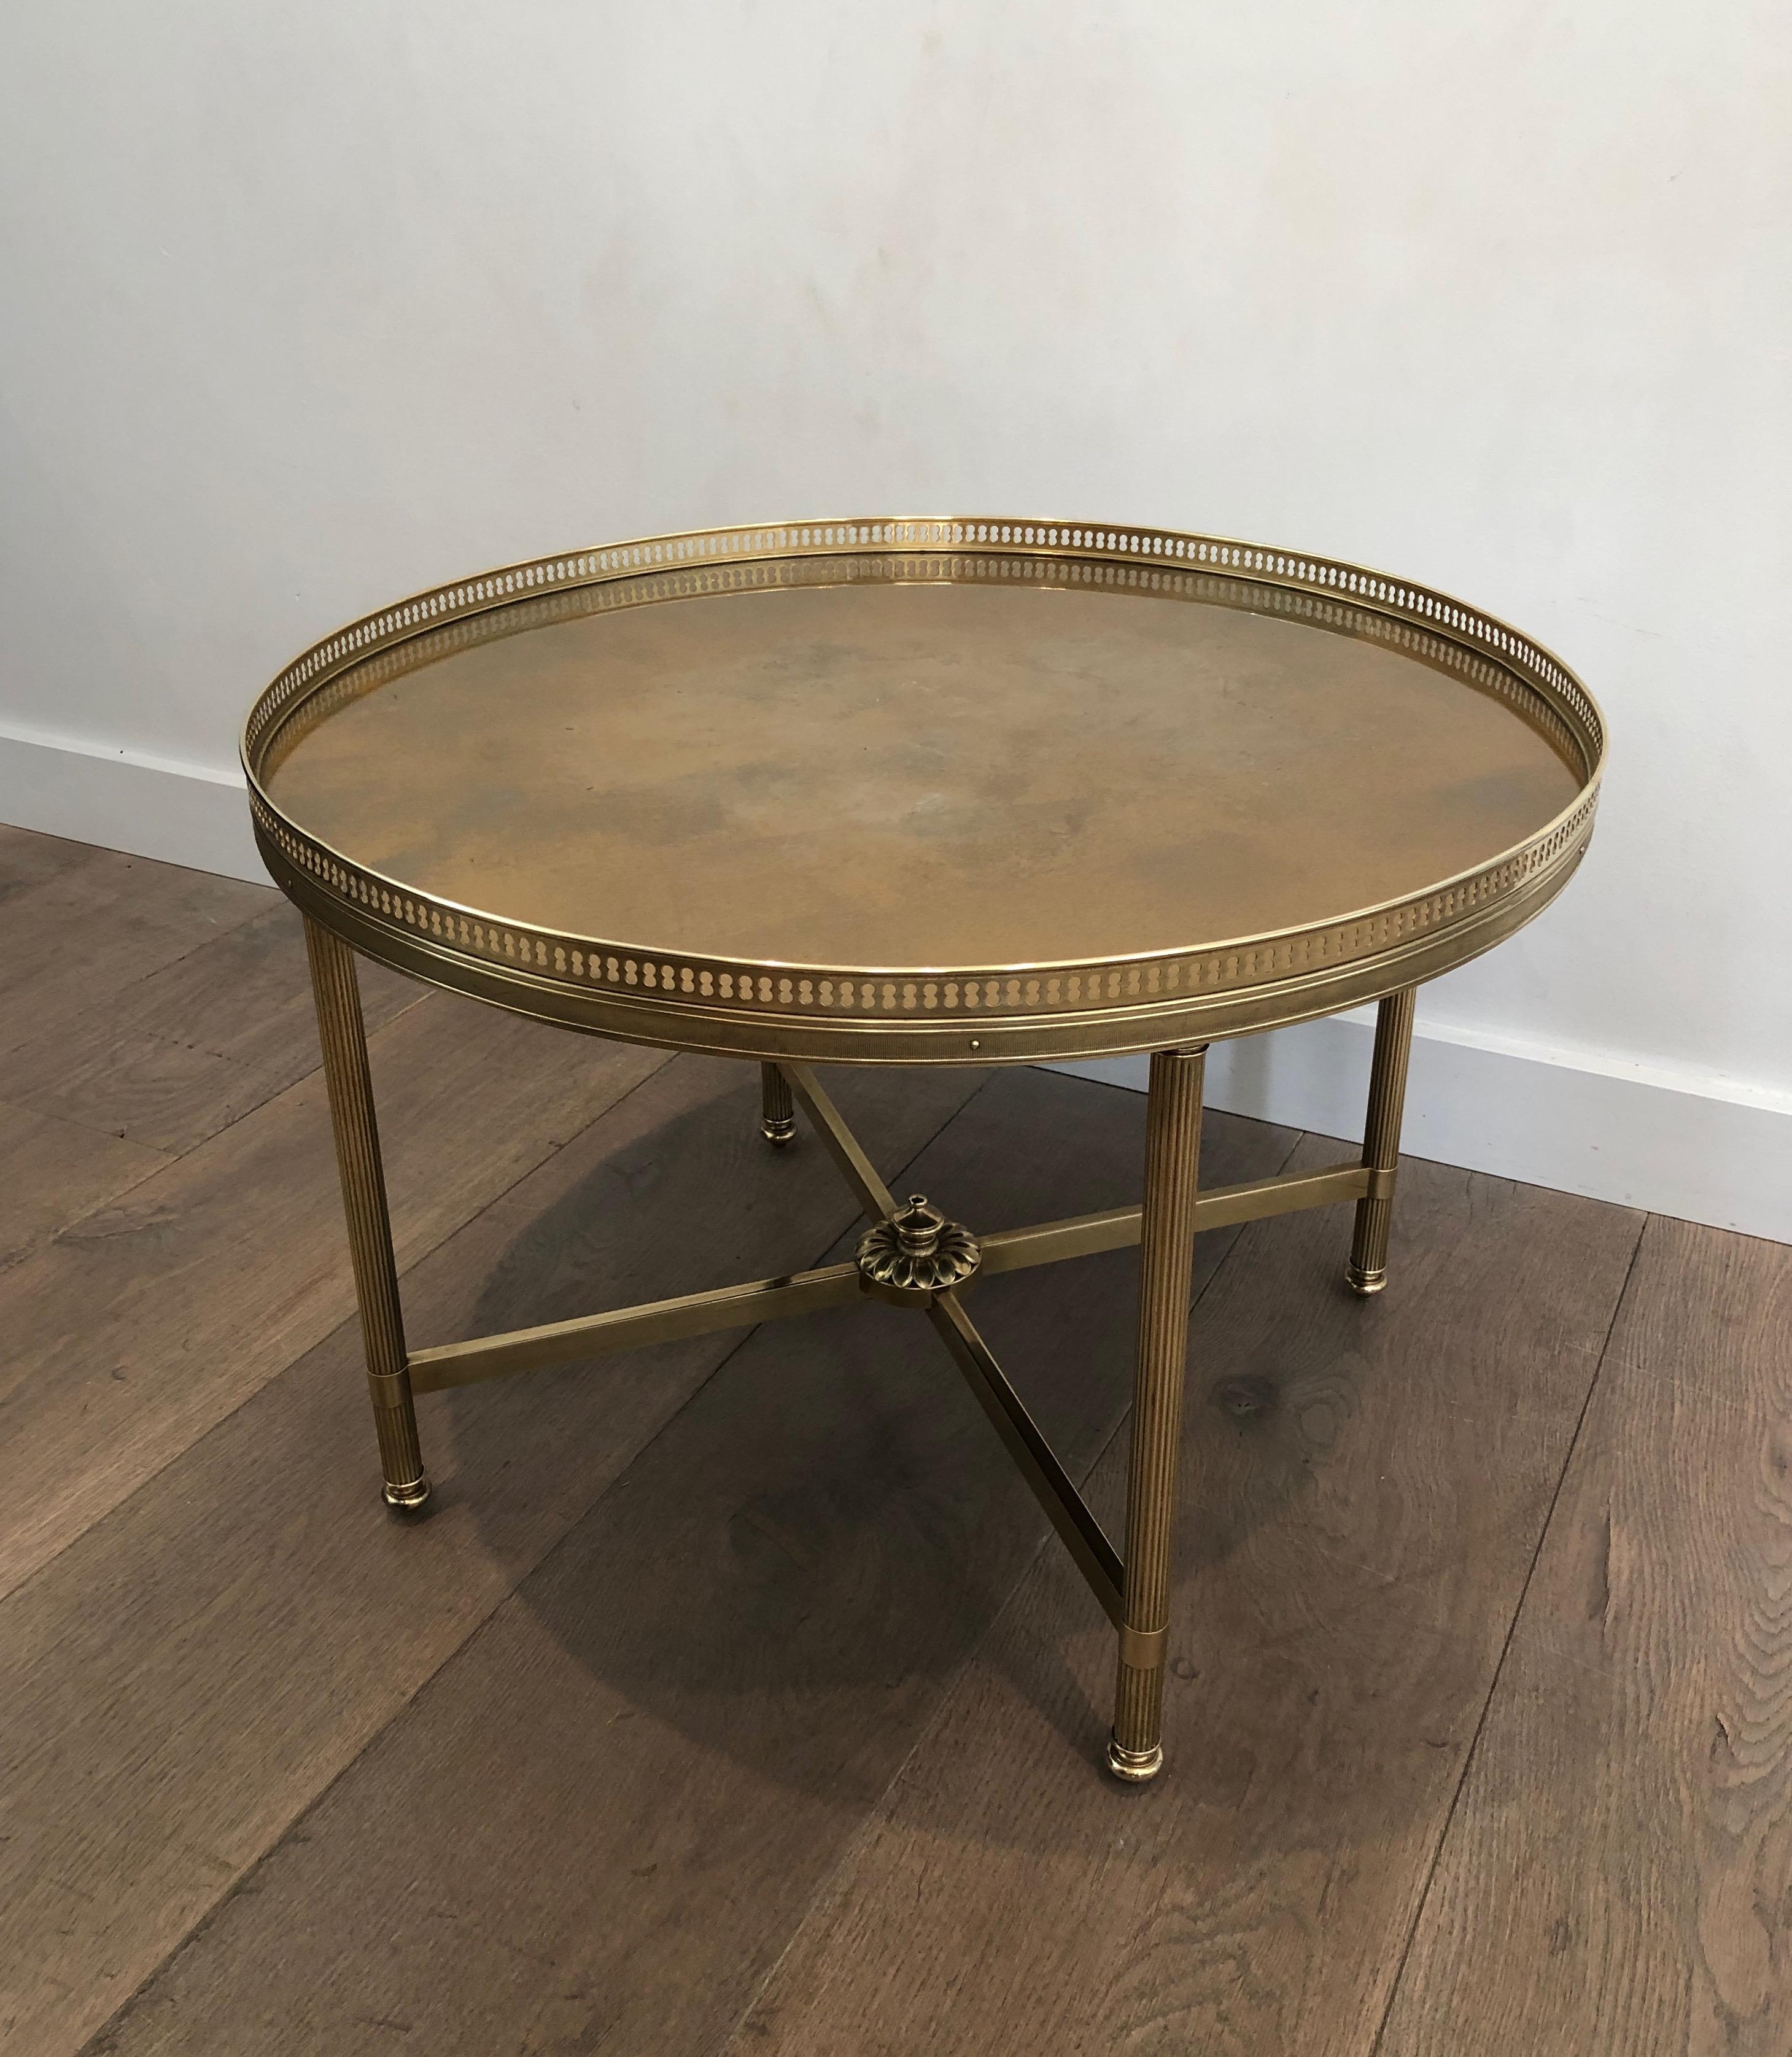 French Maison Jansen, Neoclassical Style Small Round Brass Coffee Table with Gold Top